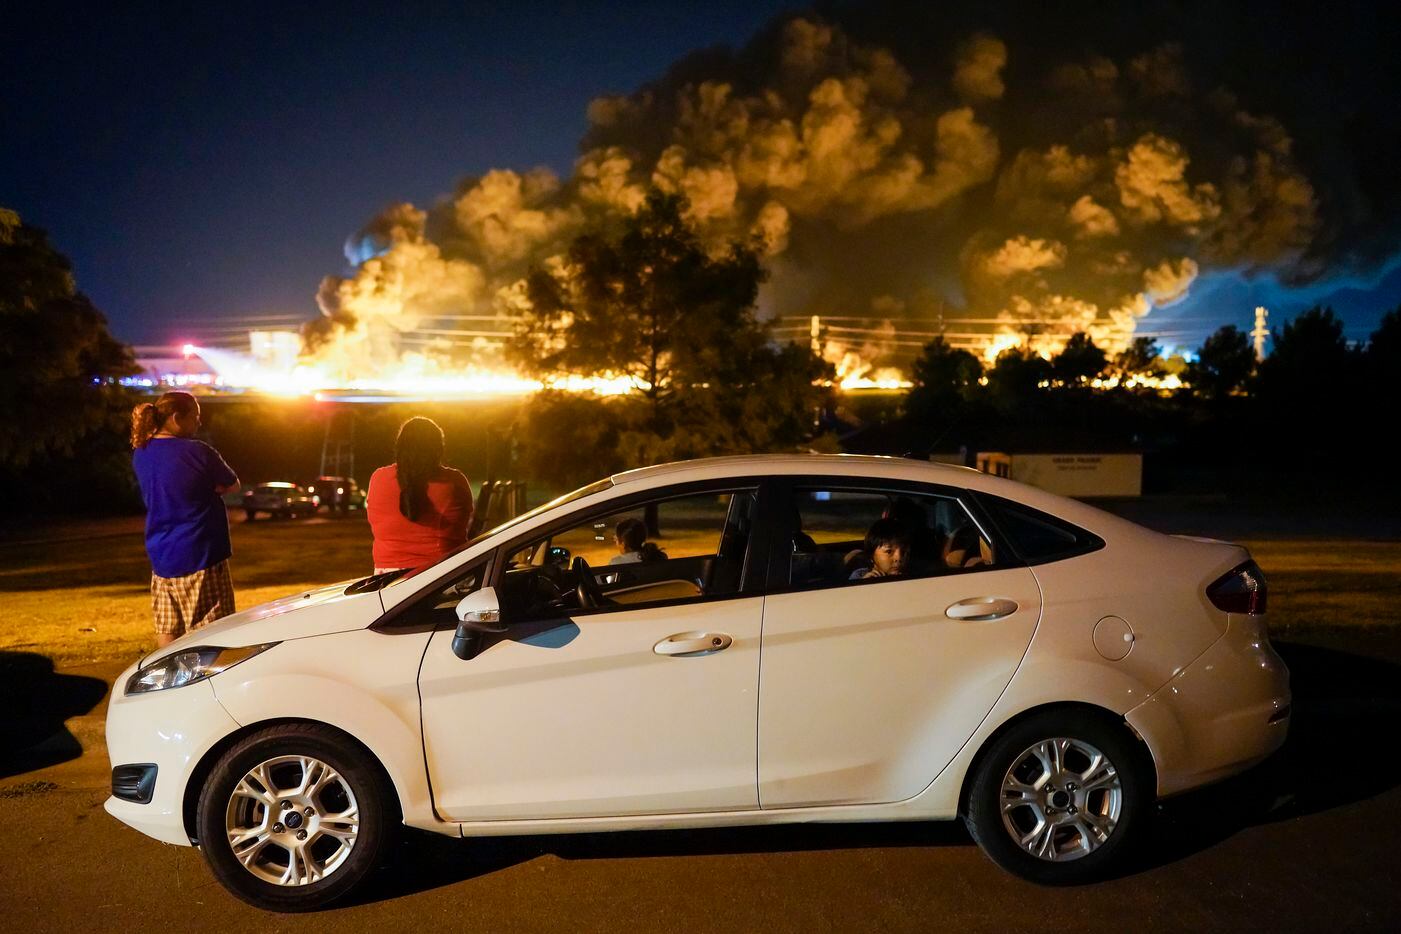 People watch from Tyre Park as fire crews battle a massive blaze in an industrial area of Grand Prairie, Texas, in the early morning hours of Wednesday, Aug. 19, 2020. The fire is in the 2000 block of West Marshall Drive, near the Bush Turnpike. Among the businesses in the area is Poly-America, a company that produces trash bags and other plastic products. (Smiley N. Pool/The Dallas Morning News)